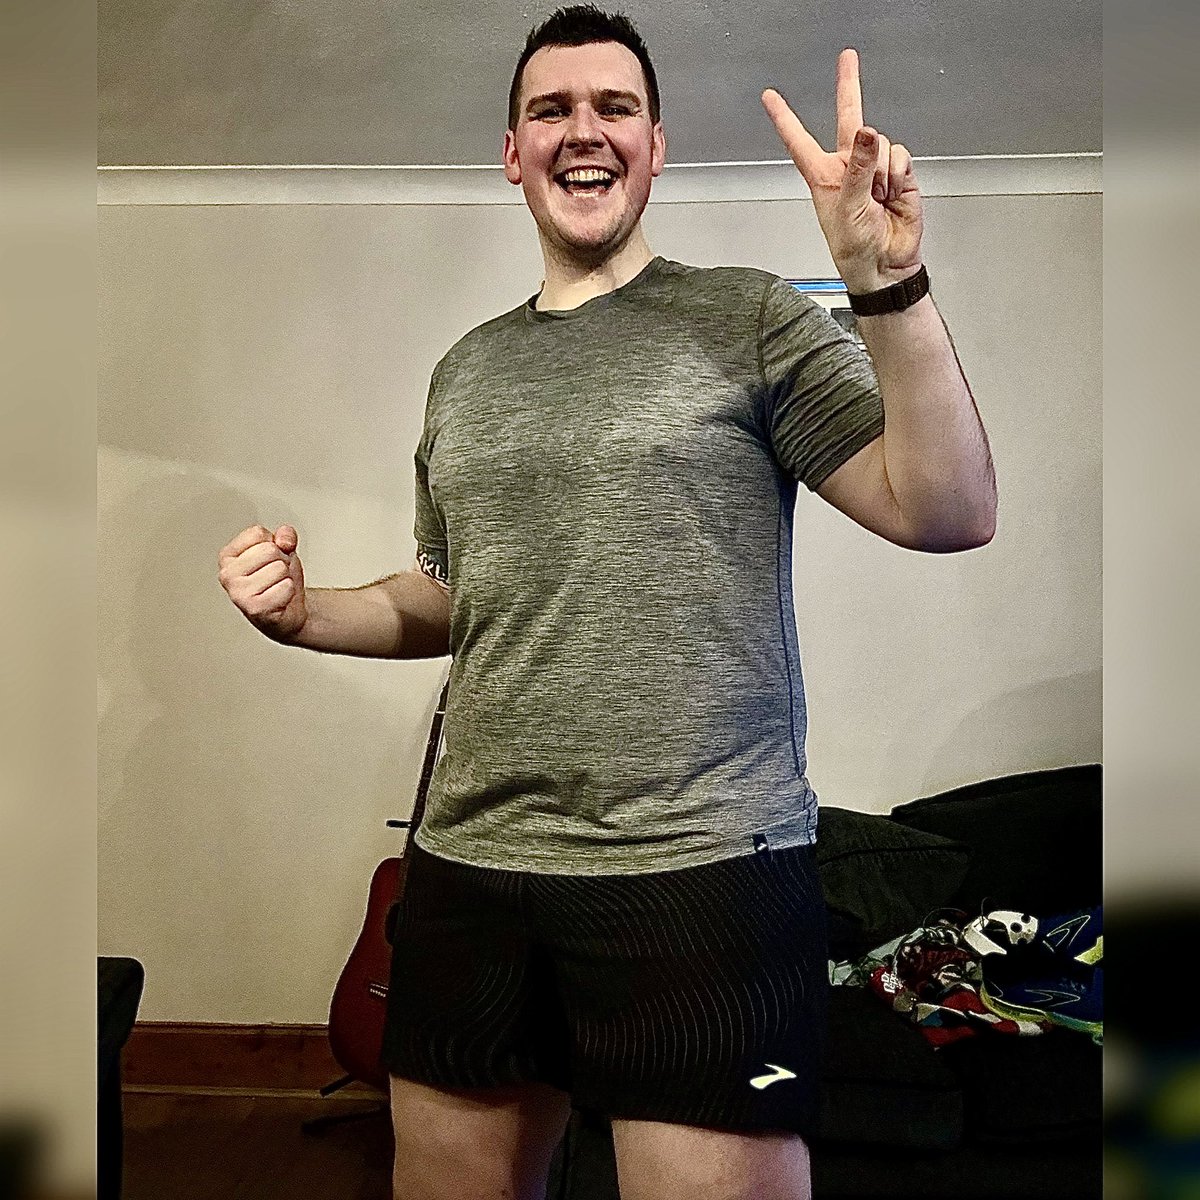 The look of a guy who: 🏋️ - lost 5lb this week making the total 2 stone 5lb (- 15kg) !! ❤️ - Getting the feeling back of self love, self respect and self worth 😍 Come at me world, I’m ready for you 😜😜 How’s your weekend going? #mentalhealthrunner #brooksrunningcollective